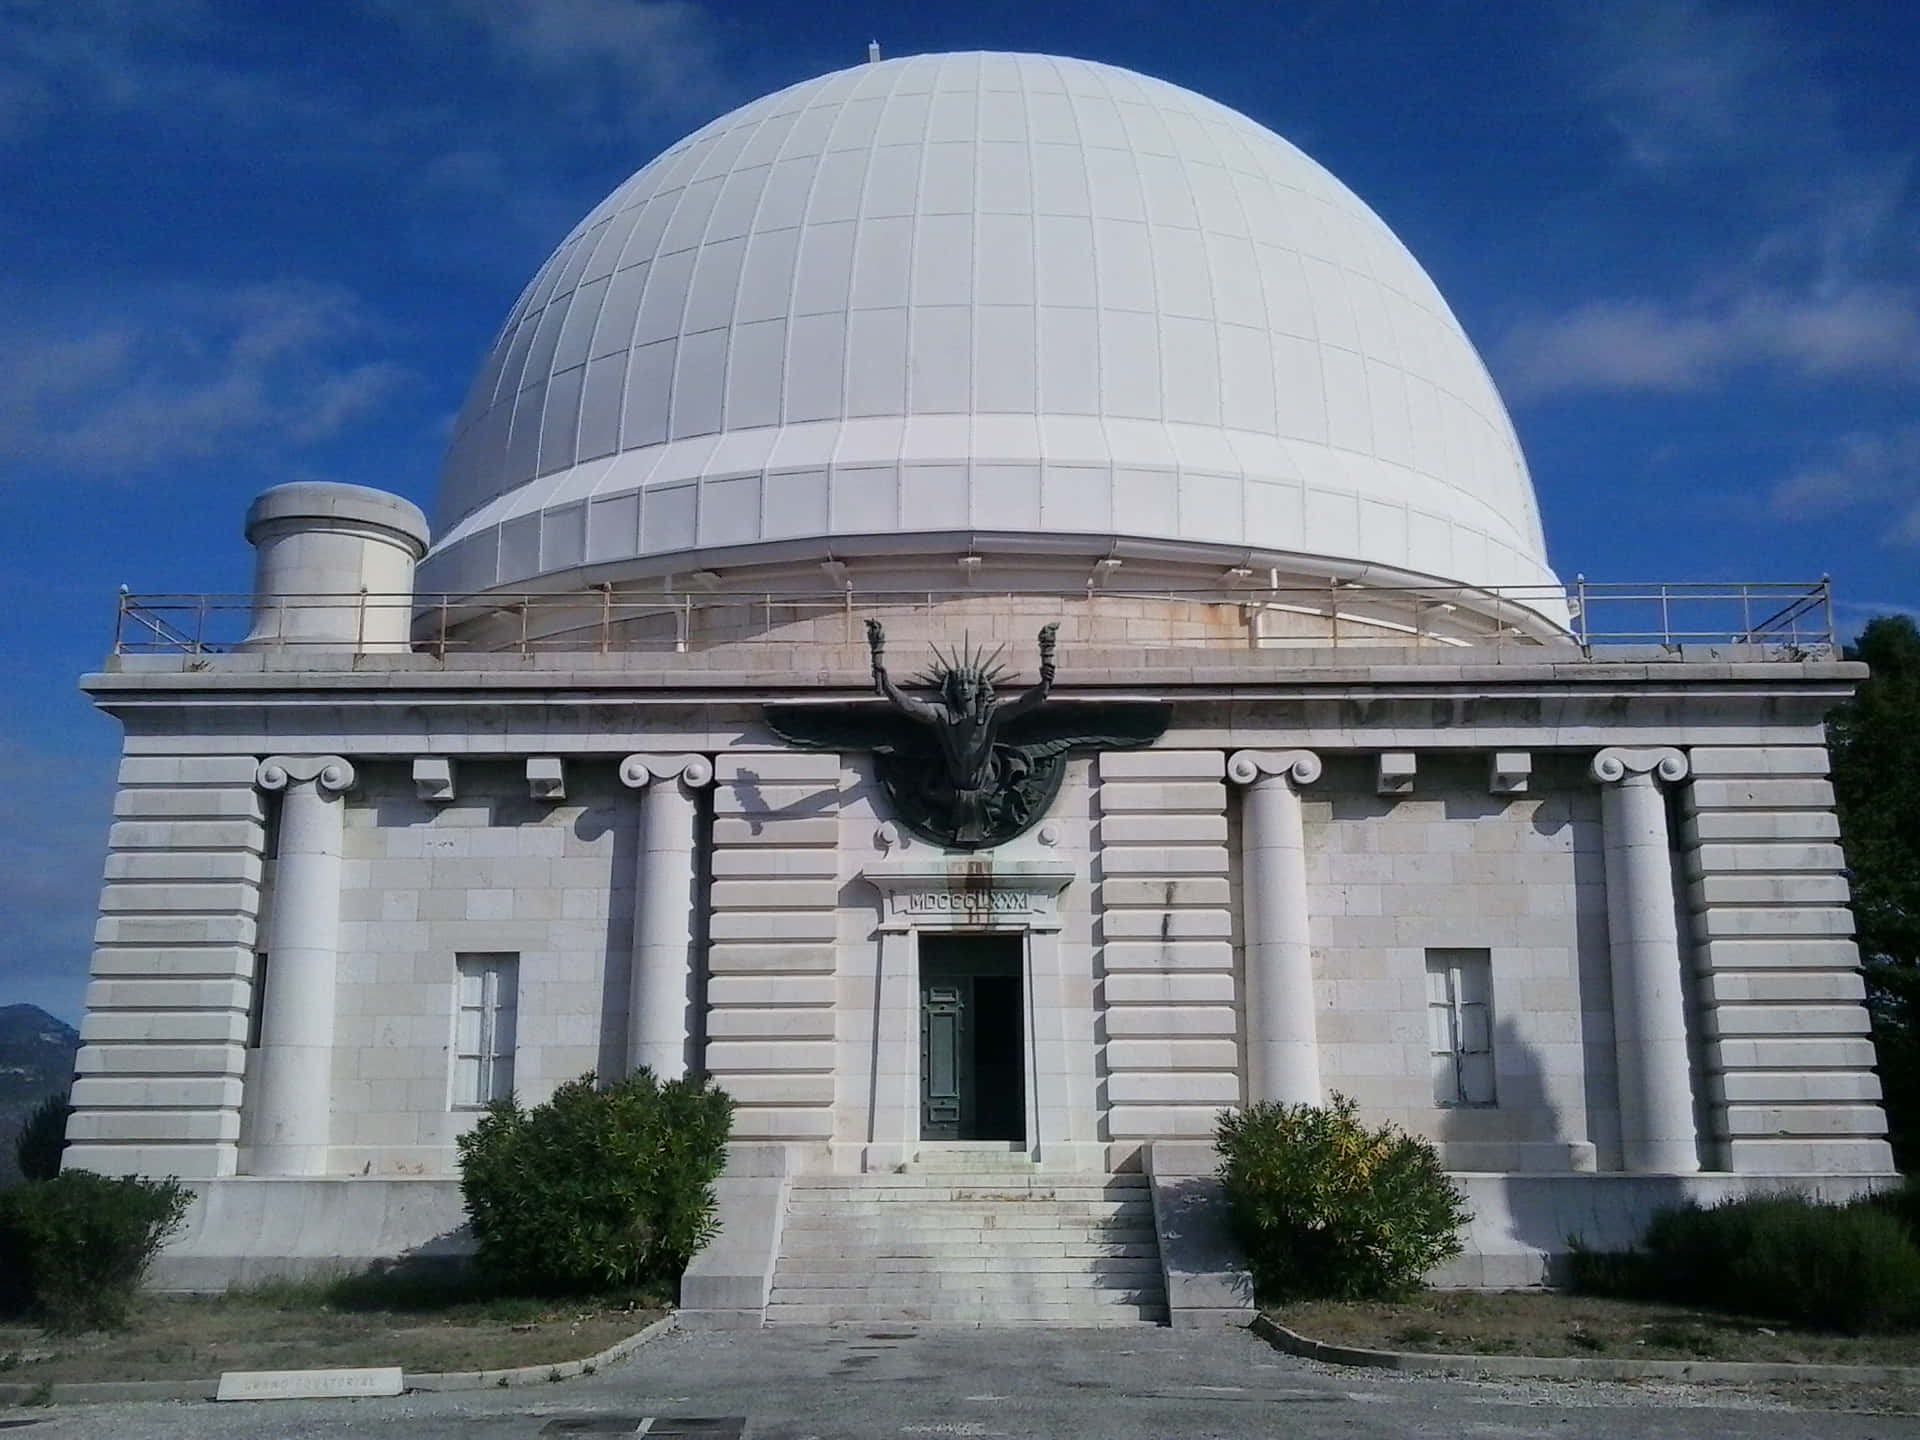 A Large Dome With A White Dome On Top